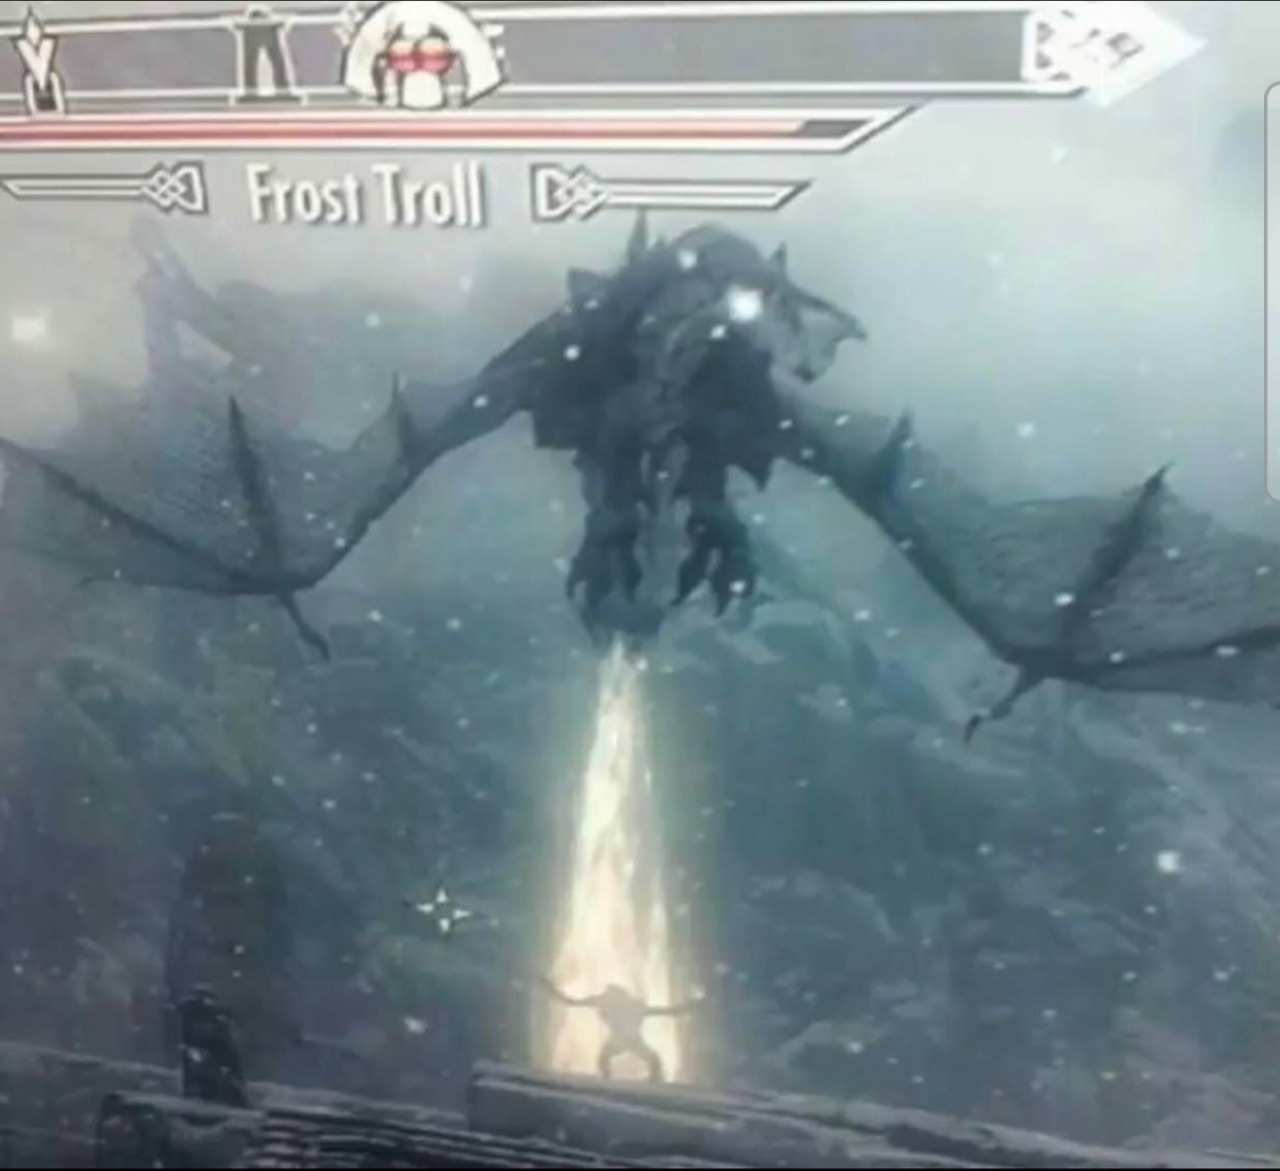 frost troll being destroyed by a dragon skyrim